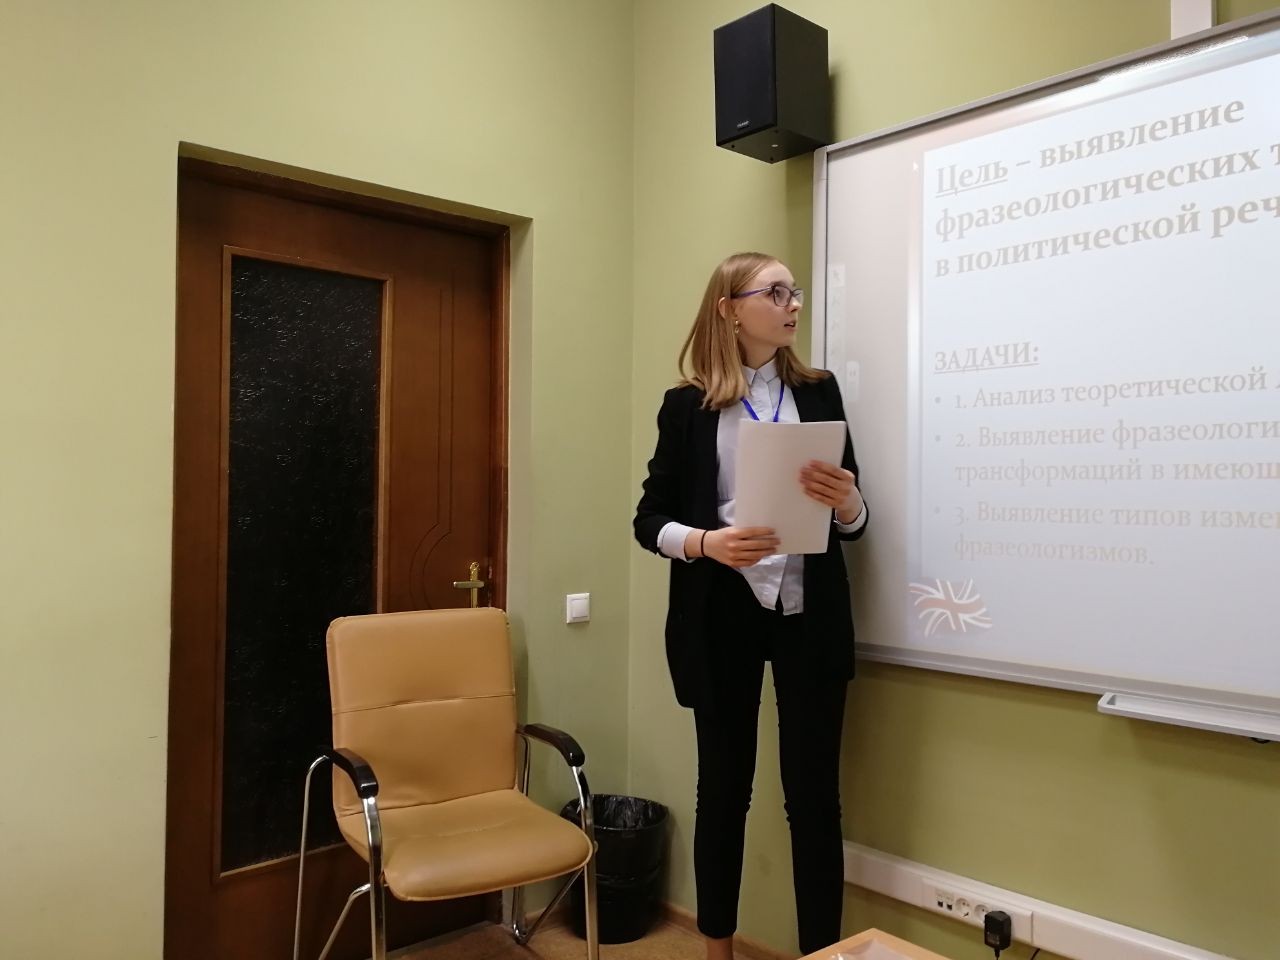 III All-Russian N.L. Lobachevsky Students Conference: Section Linguistic aspects of Germanic (English, German) and Romance (French, Spanish) languages